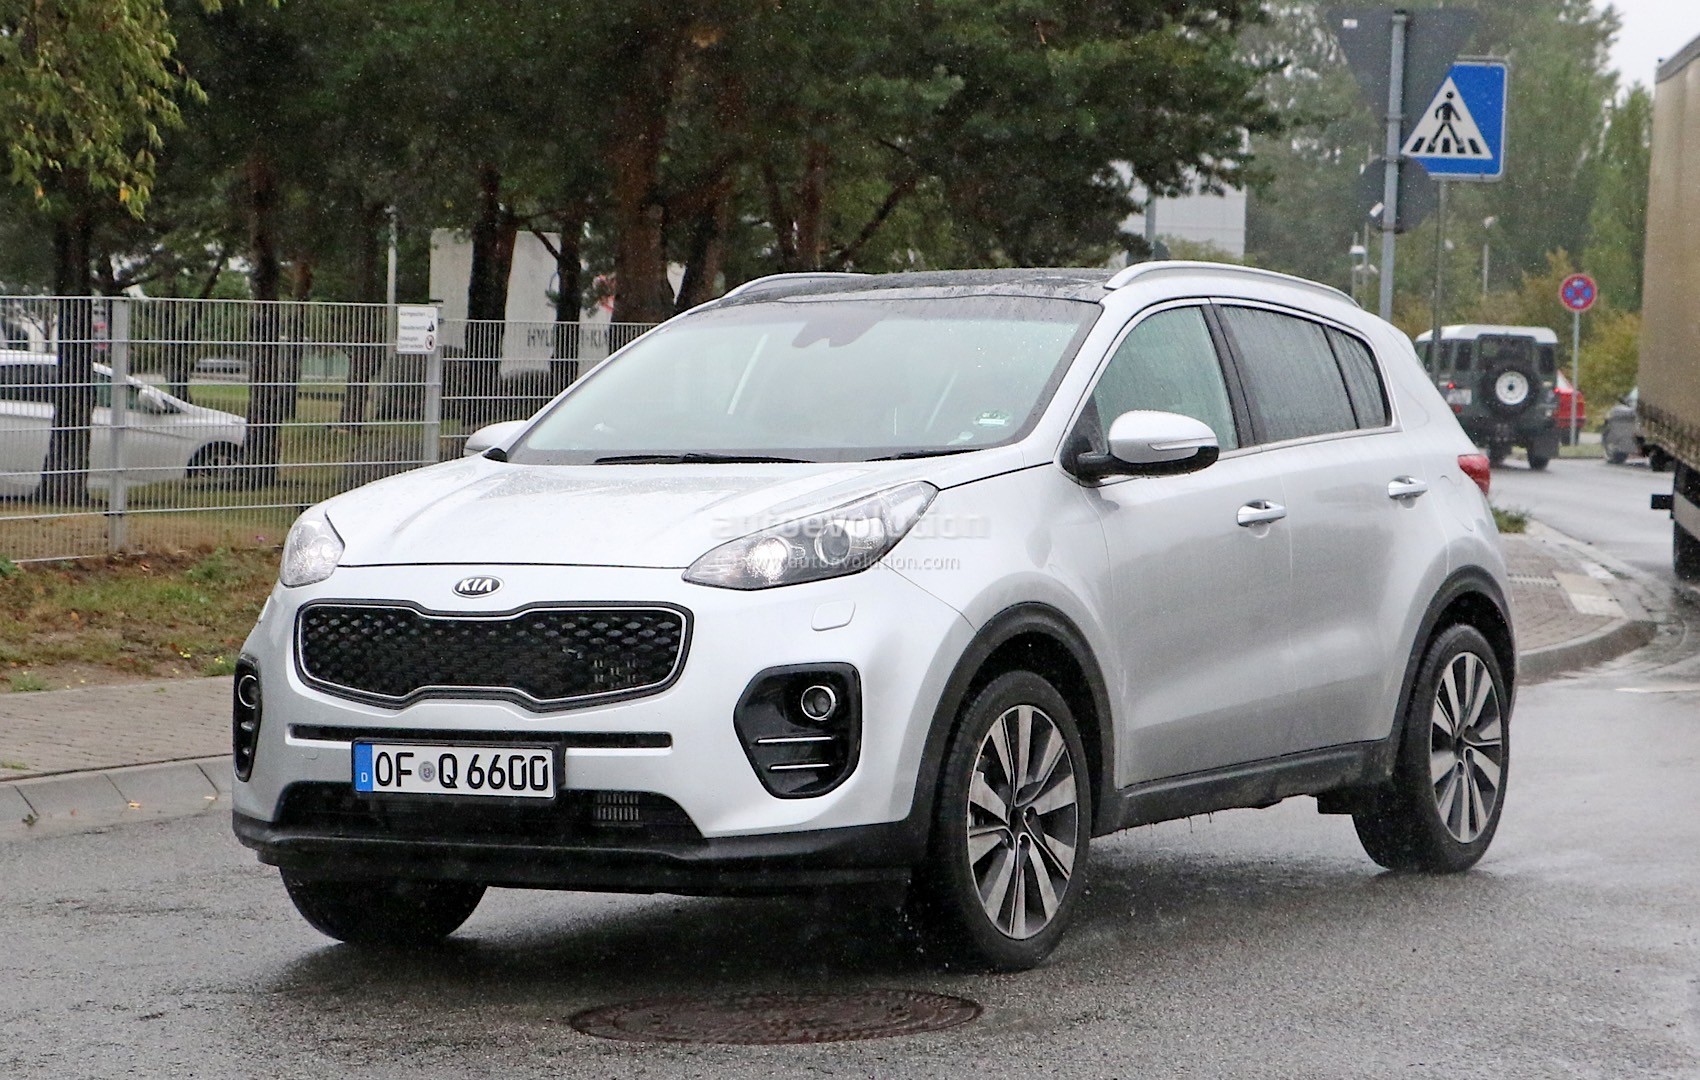 2016-kia-sportage-spotted-camouflage-free-looks-even-better-in-real-life-photo-gallery_2.jpg